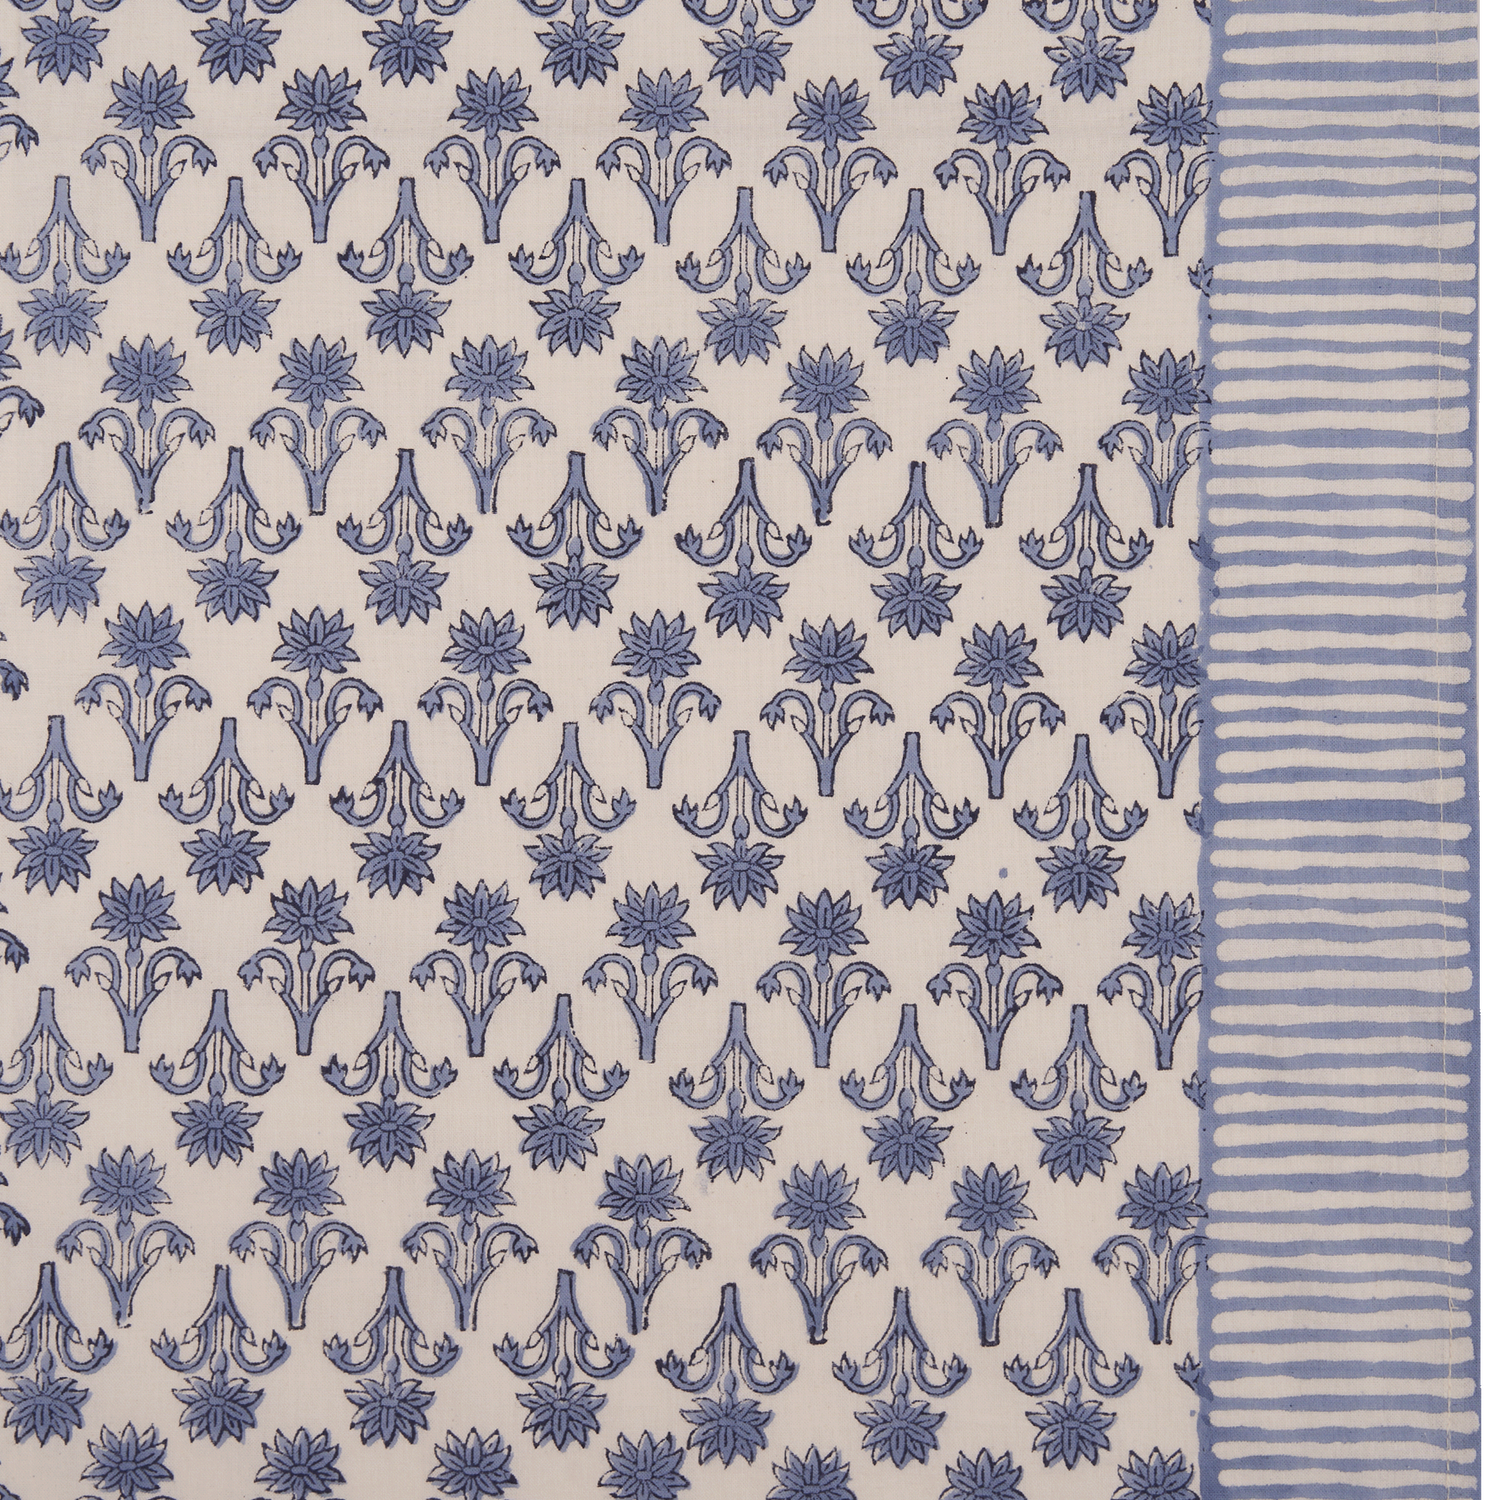 Lily tablecloth - Blue